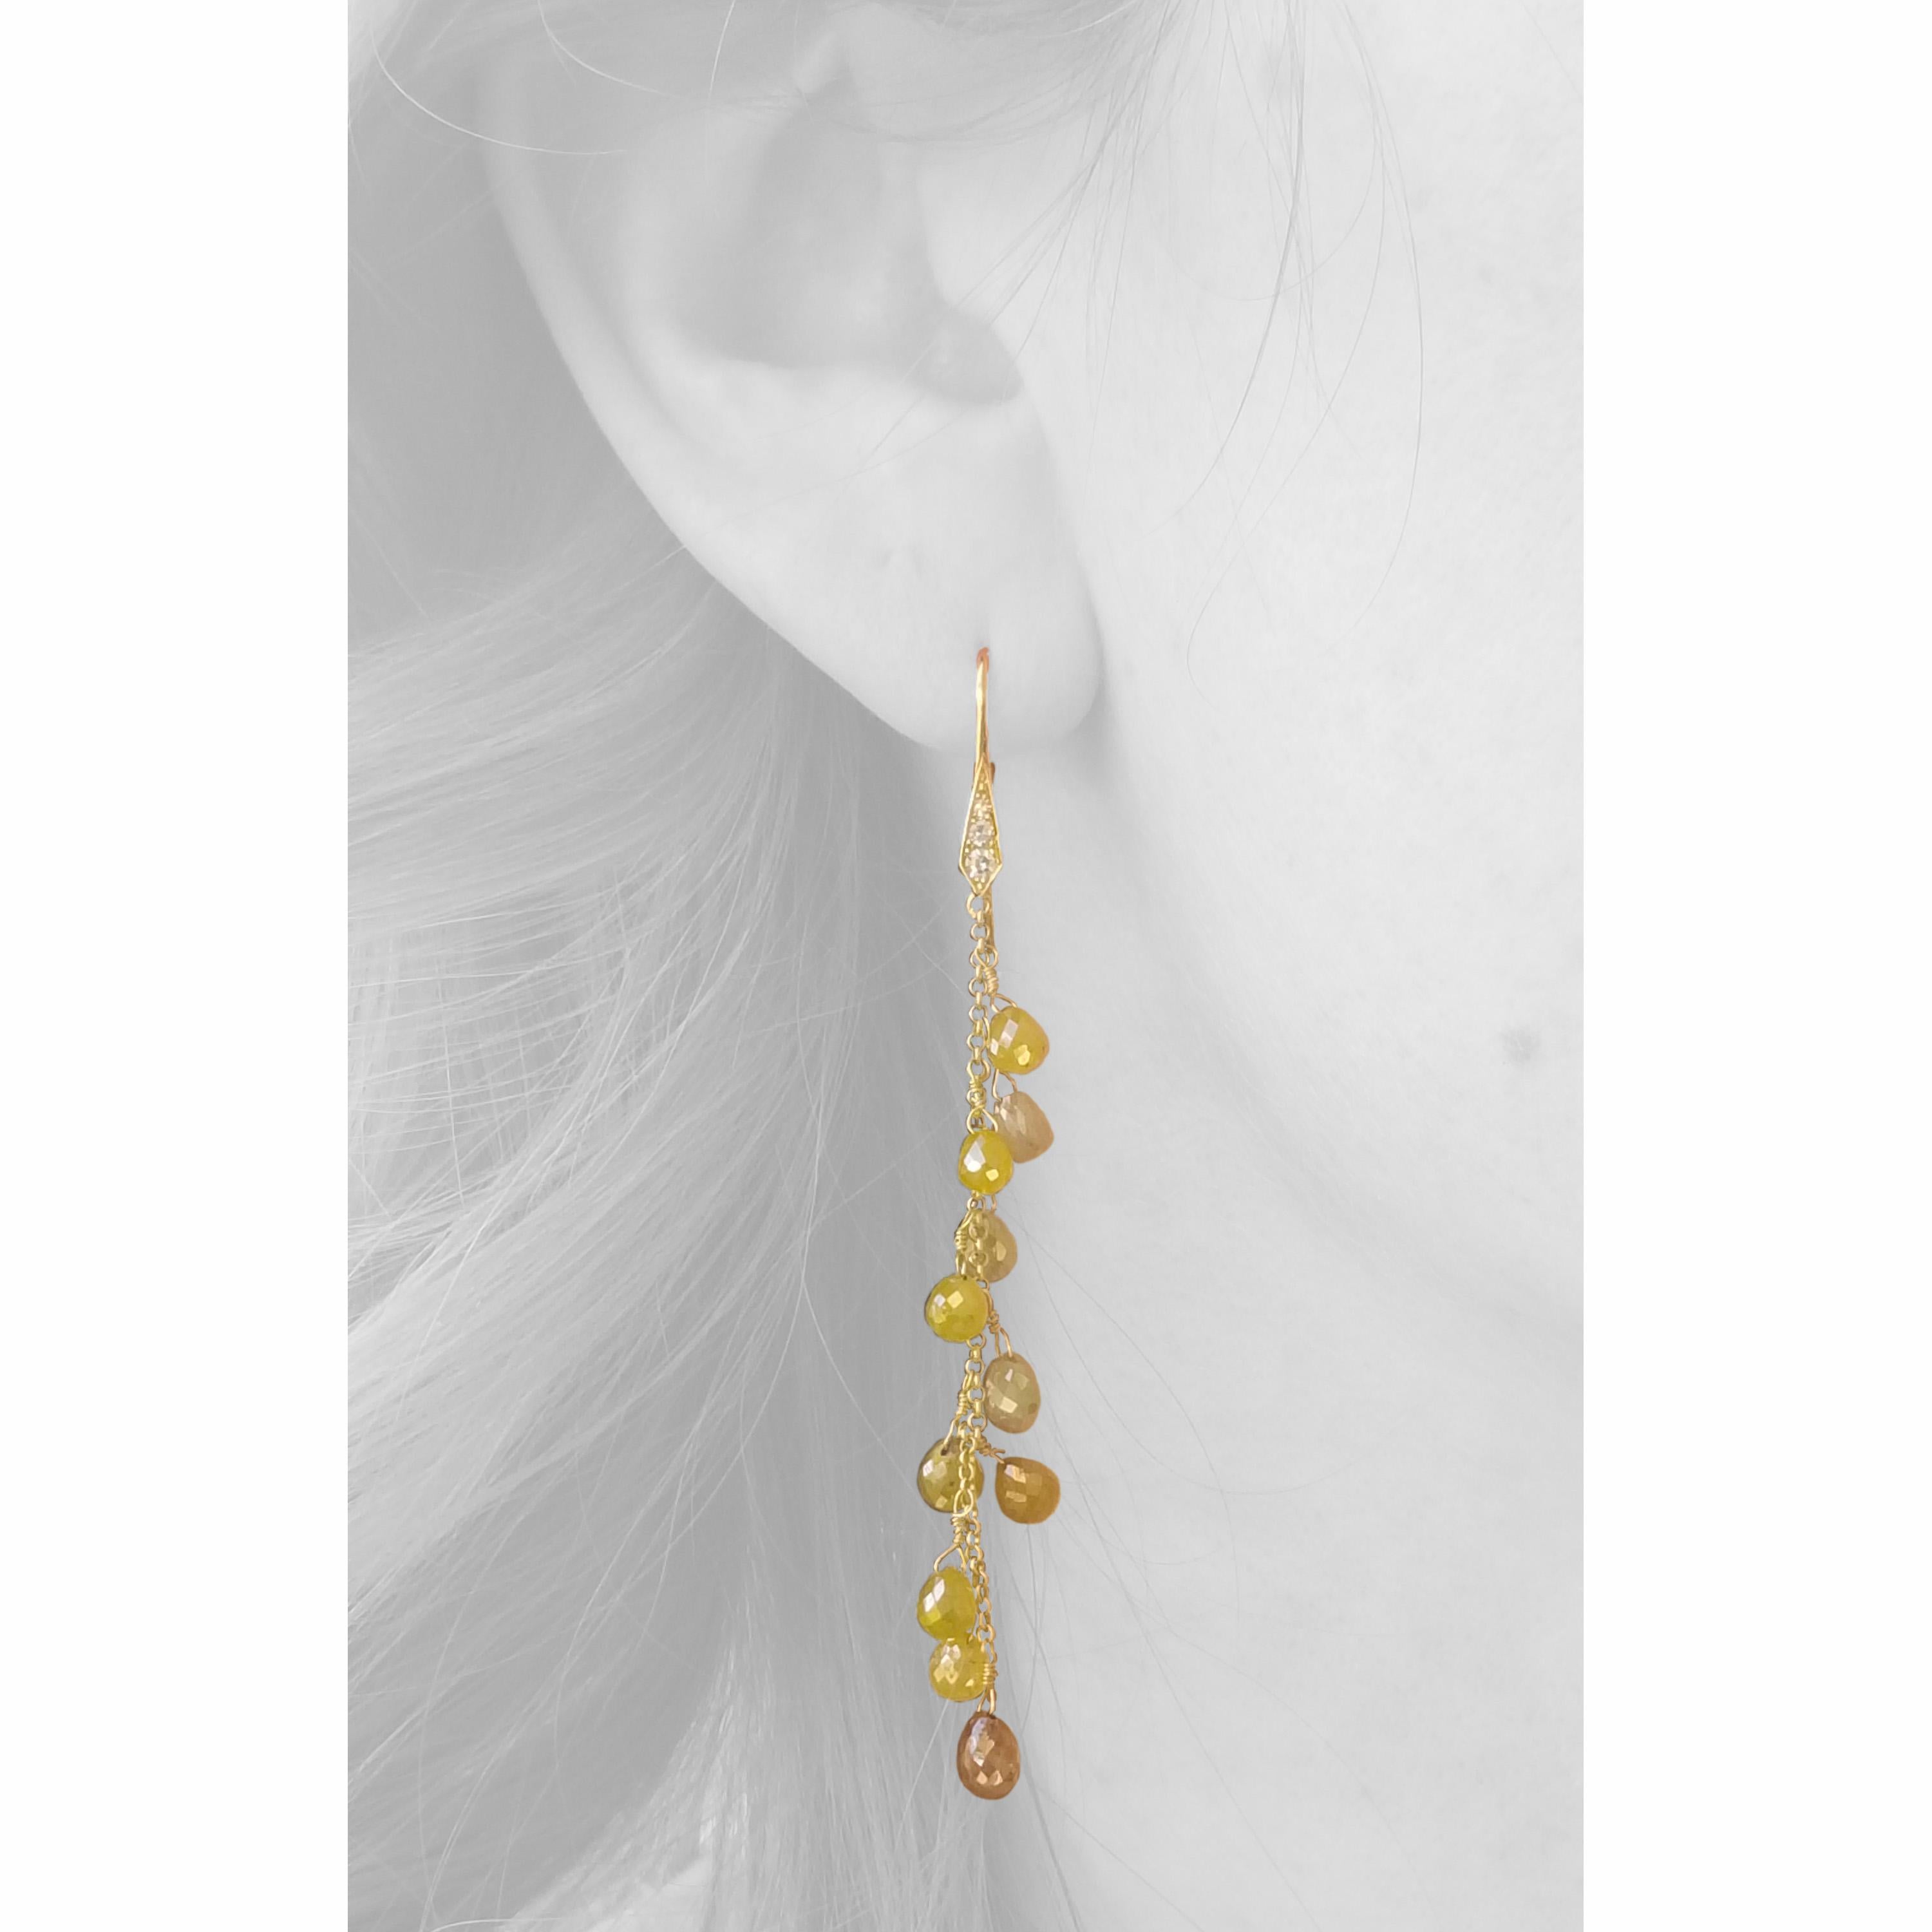 These earrings are an extraordinarily fun way to wear diamonds; they move and play nonstop, so the slim line of diamonds are extremely high impact. The unique metallic luster that you see in these translucent 